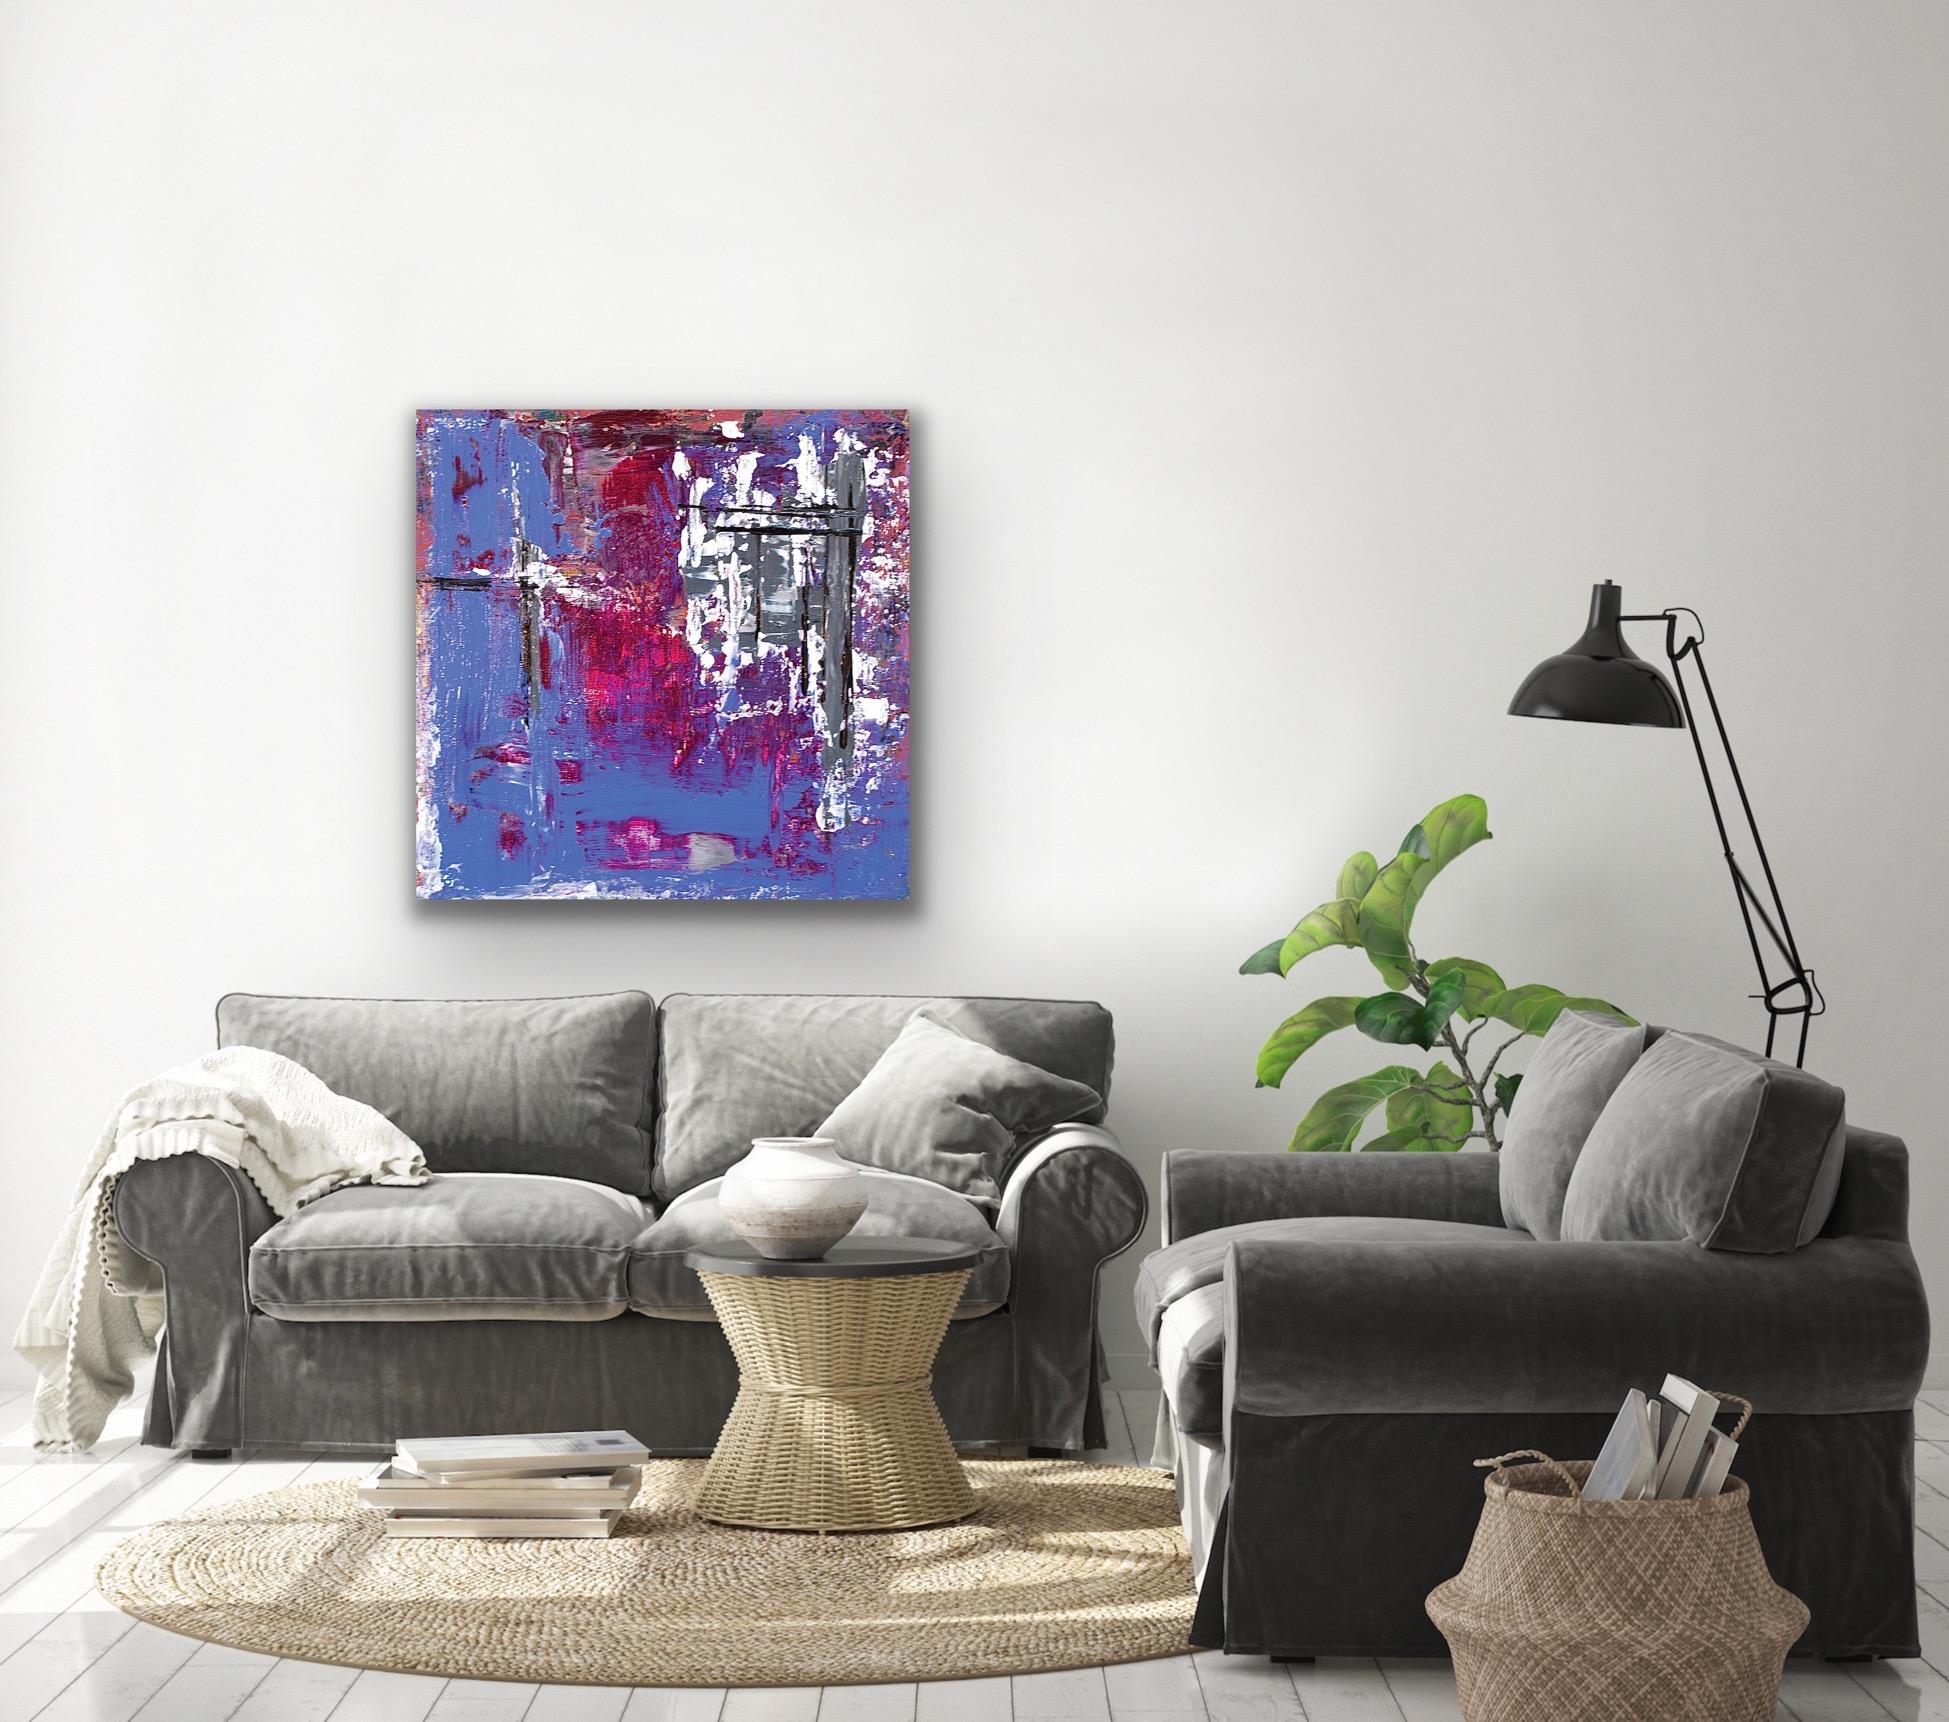 Abstract Painting, Modern Wall Art, Large Indoor Outdoor Decor, Print on Metal 2